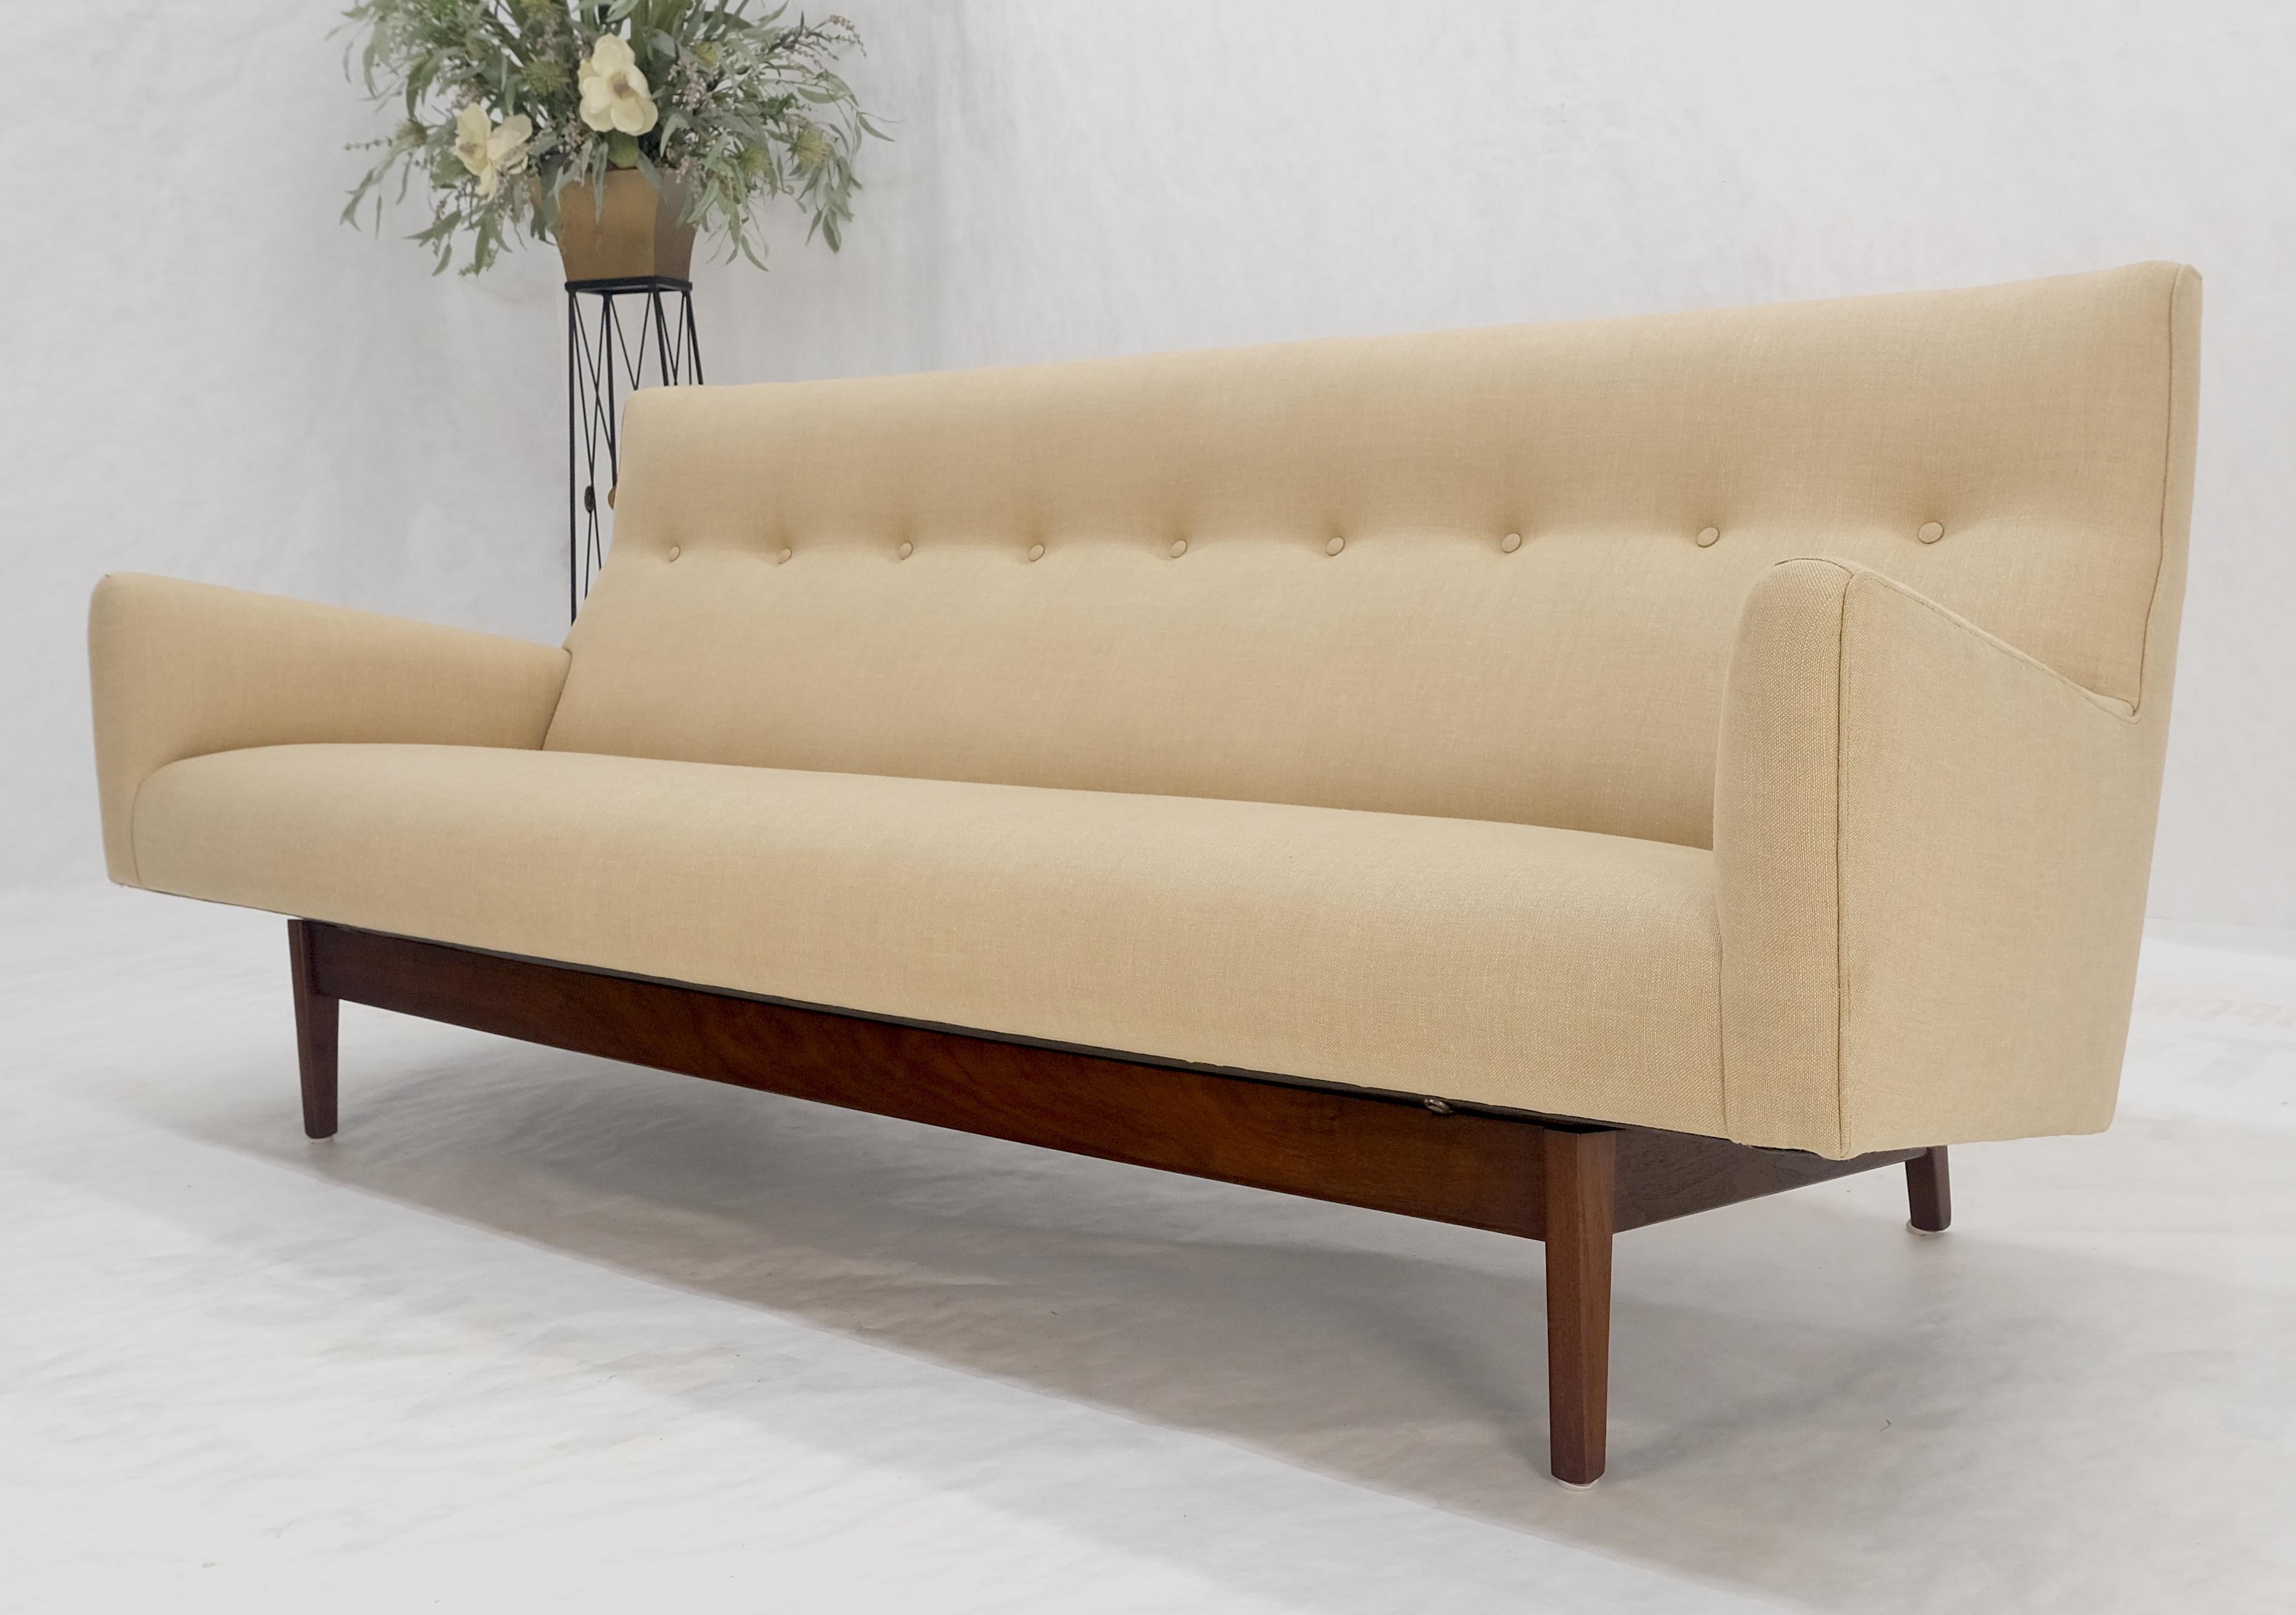 Jens Risom NEW Beige Linen Upholstery Oiled Walnut Frame c1960s Sofa Couch MINT! For Sale 6